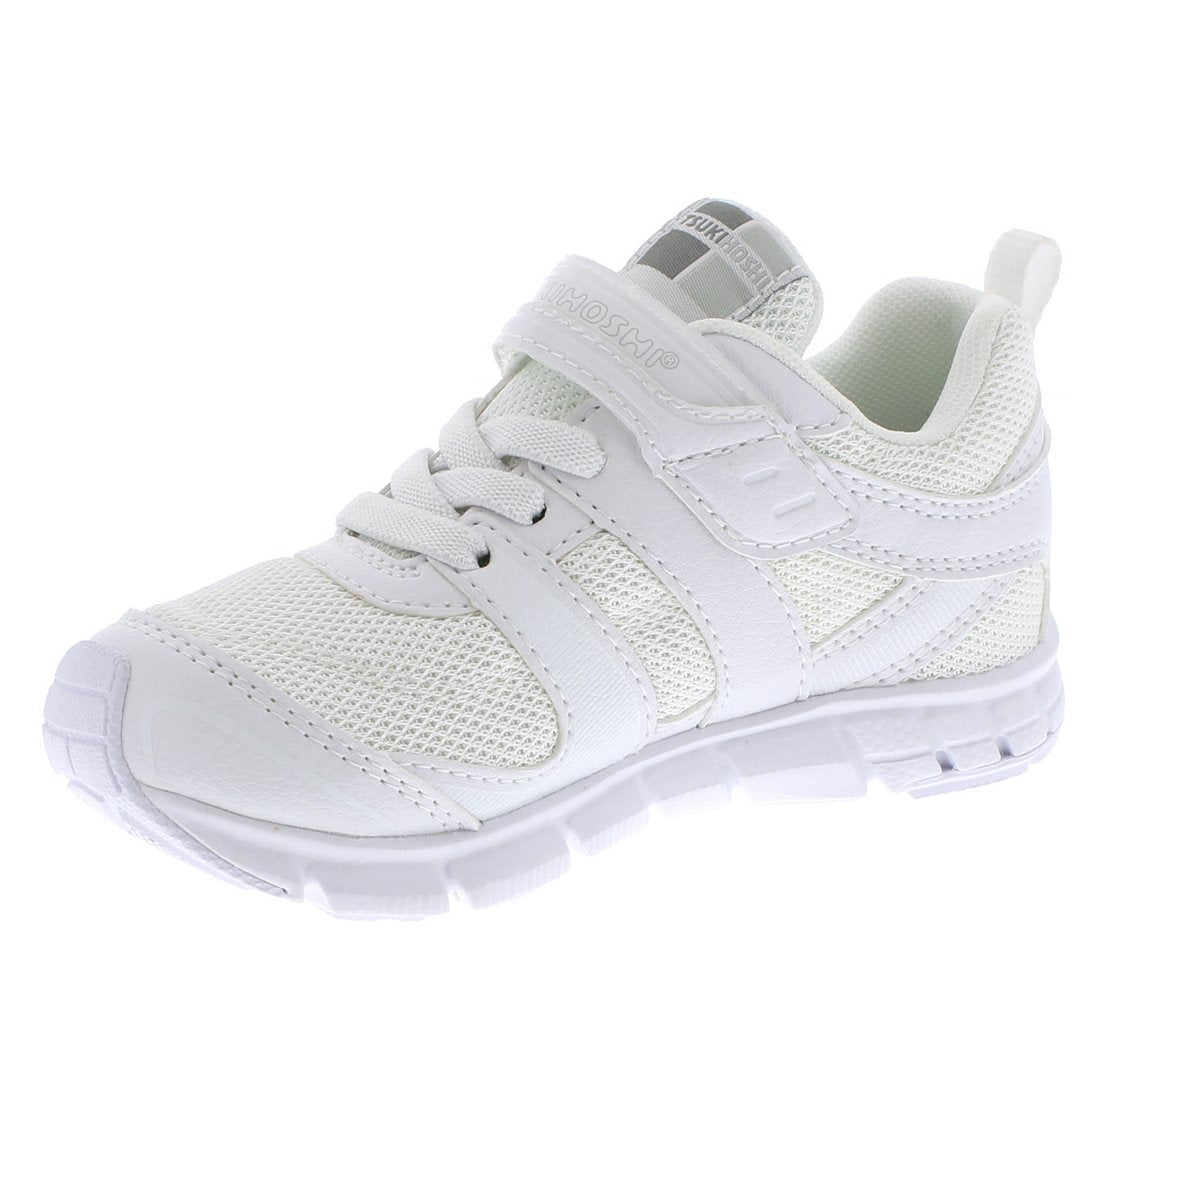 Child Tsukihoshi Velocity Sneaker in White/White from the front view